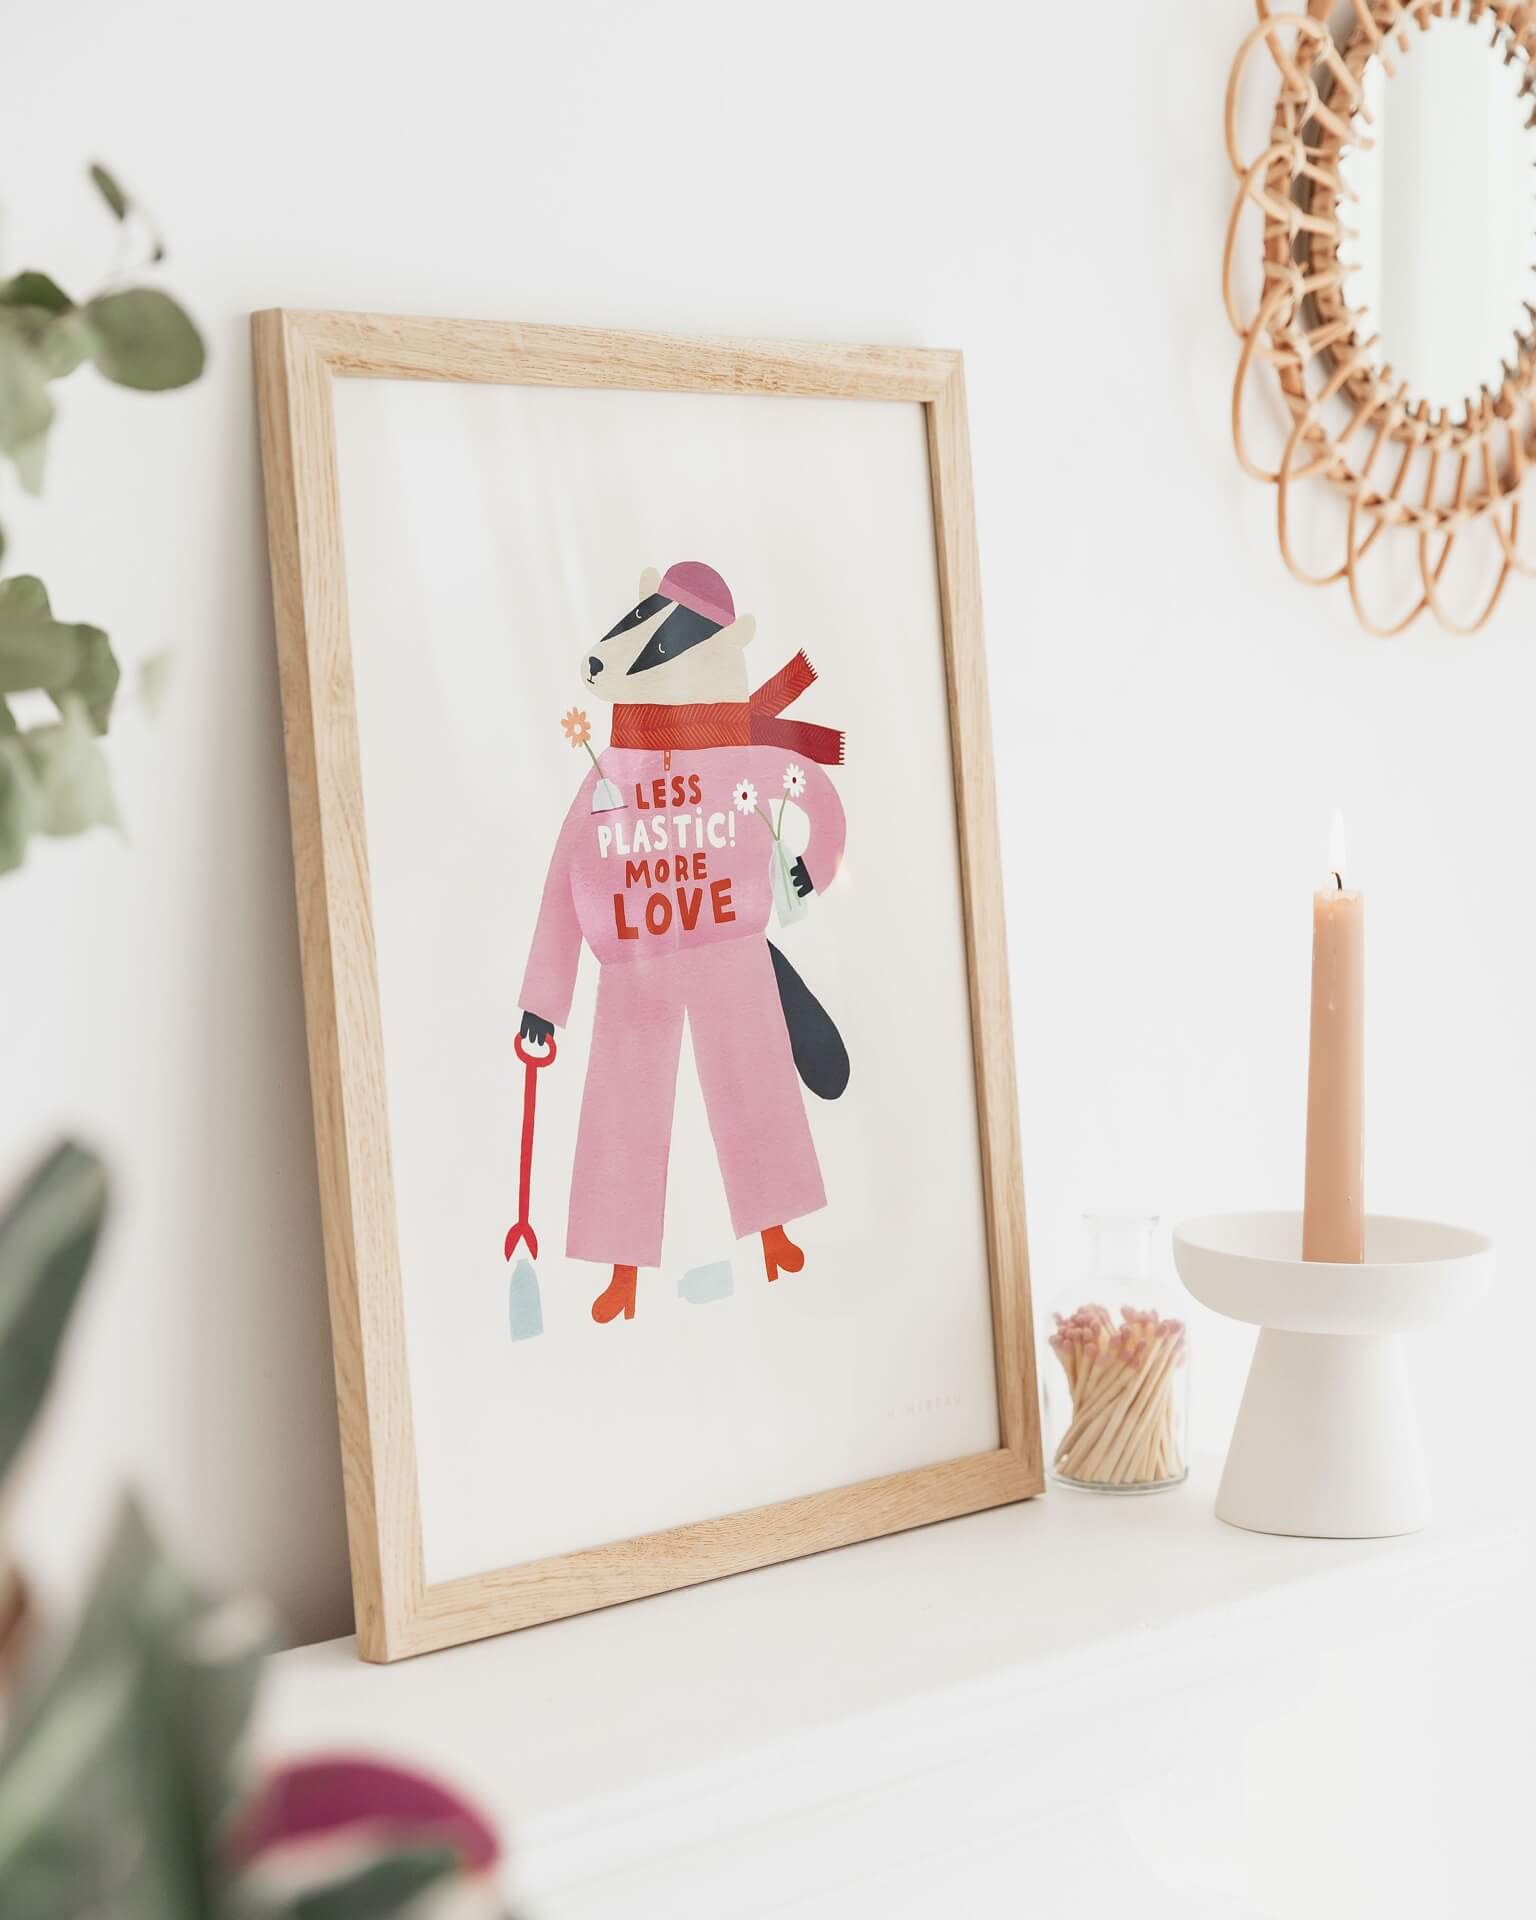 illustrated art print of a badger wearing pink by Minibeau.